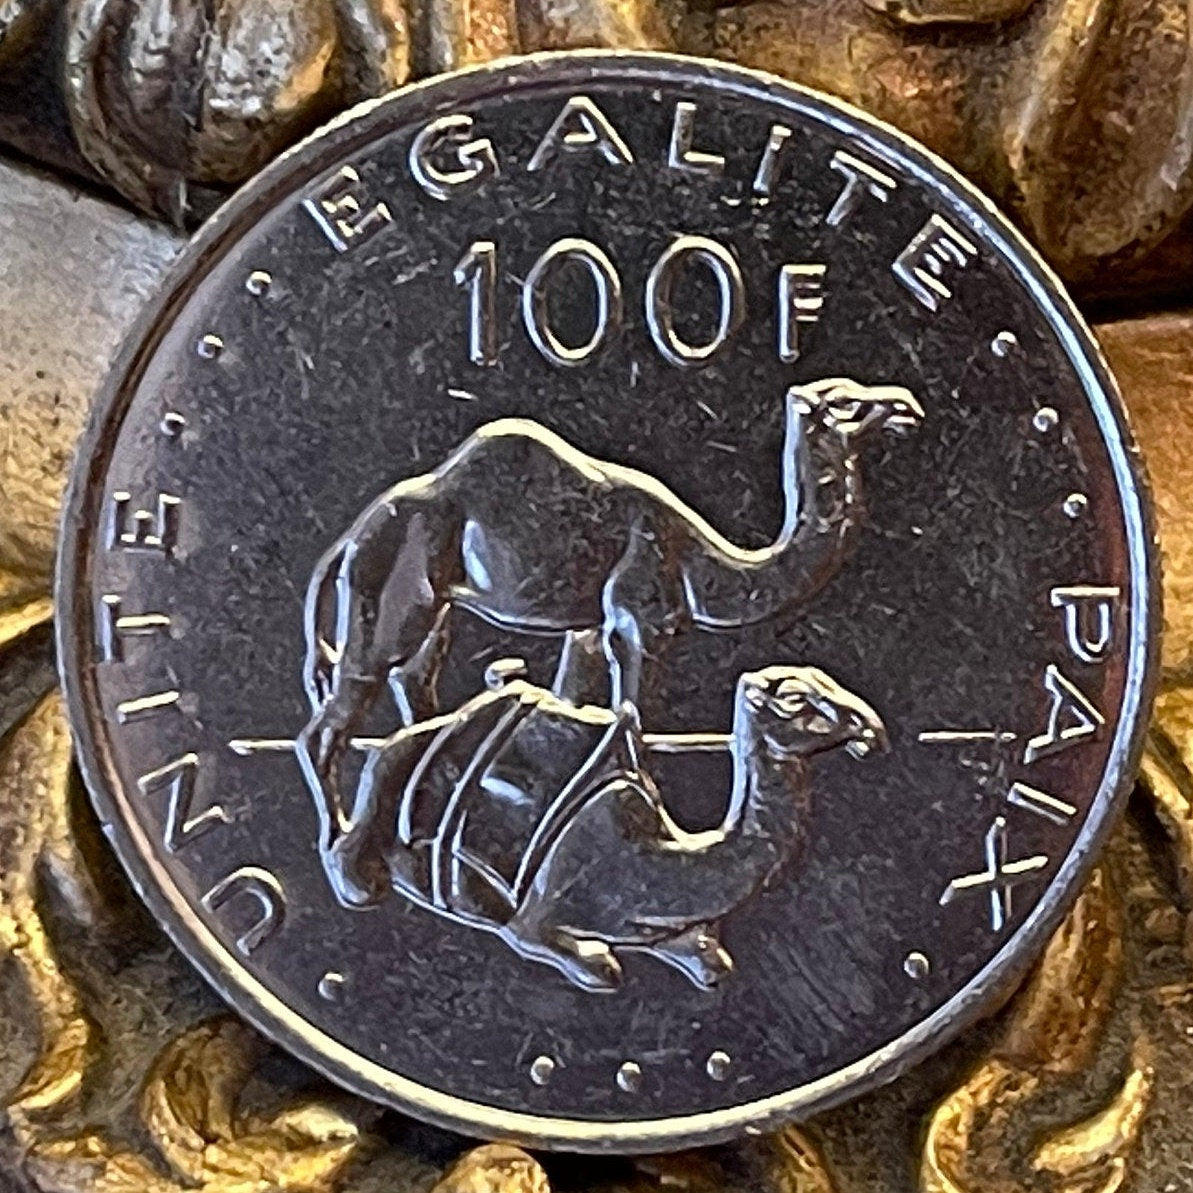 Dromedary Camels & Jile Daggers of Afar and Issa Tribes Djibouti 100 Francs Authentic Coin Money for Jewelry (Unity Equality Peace)